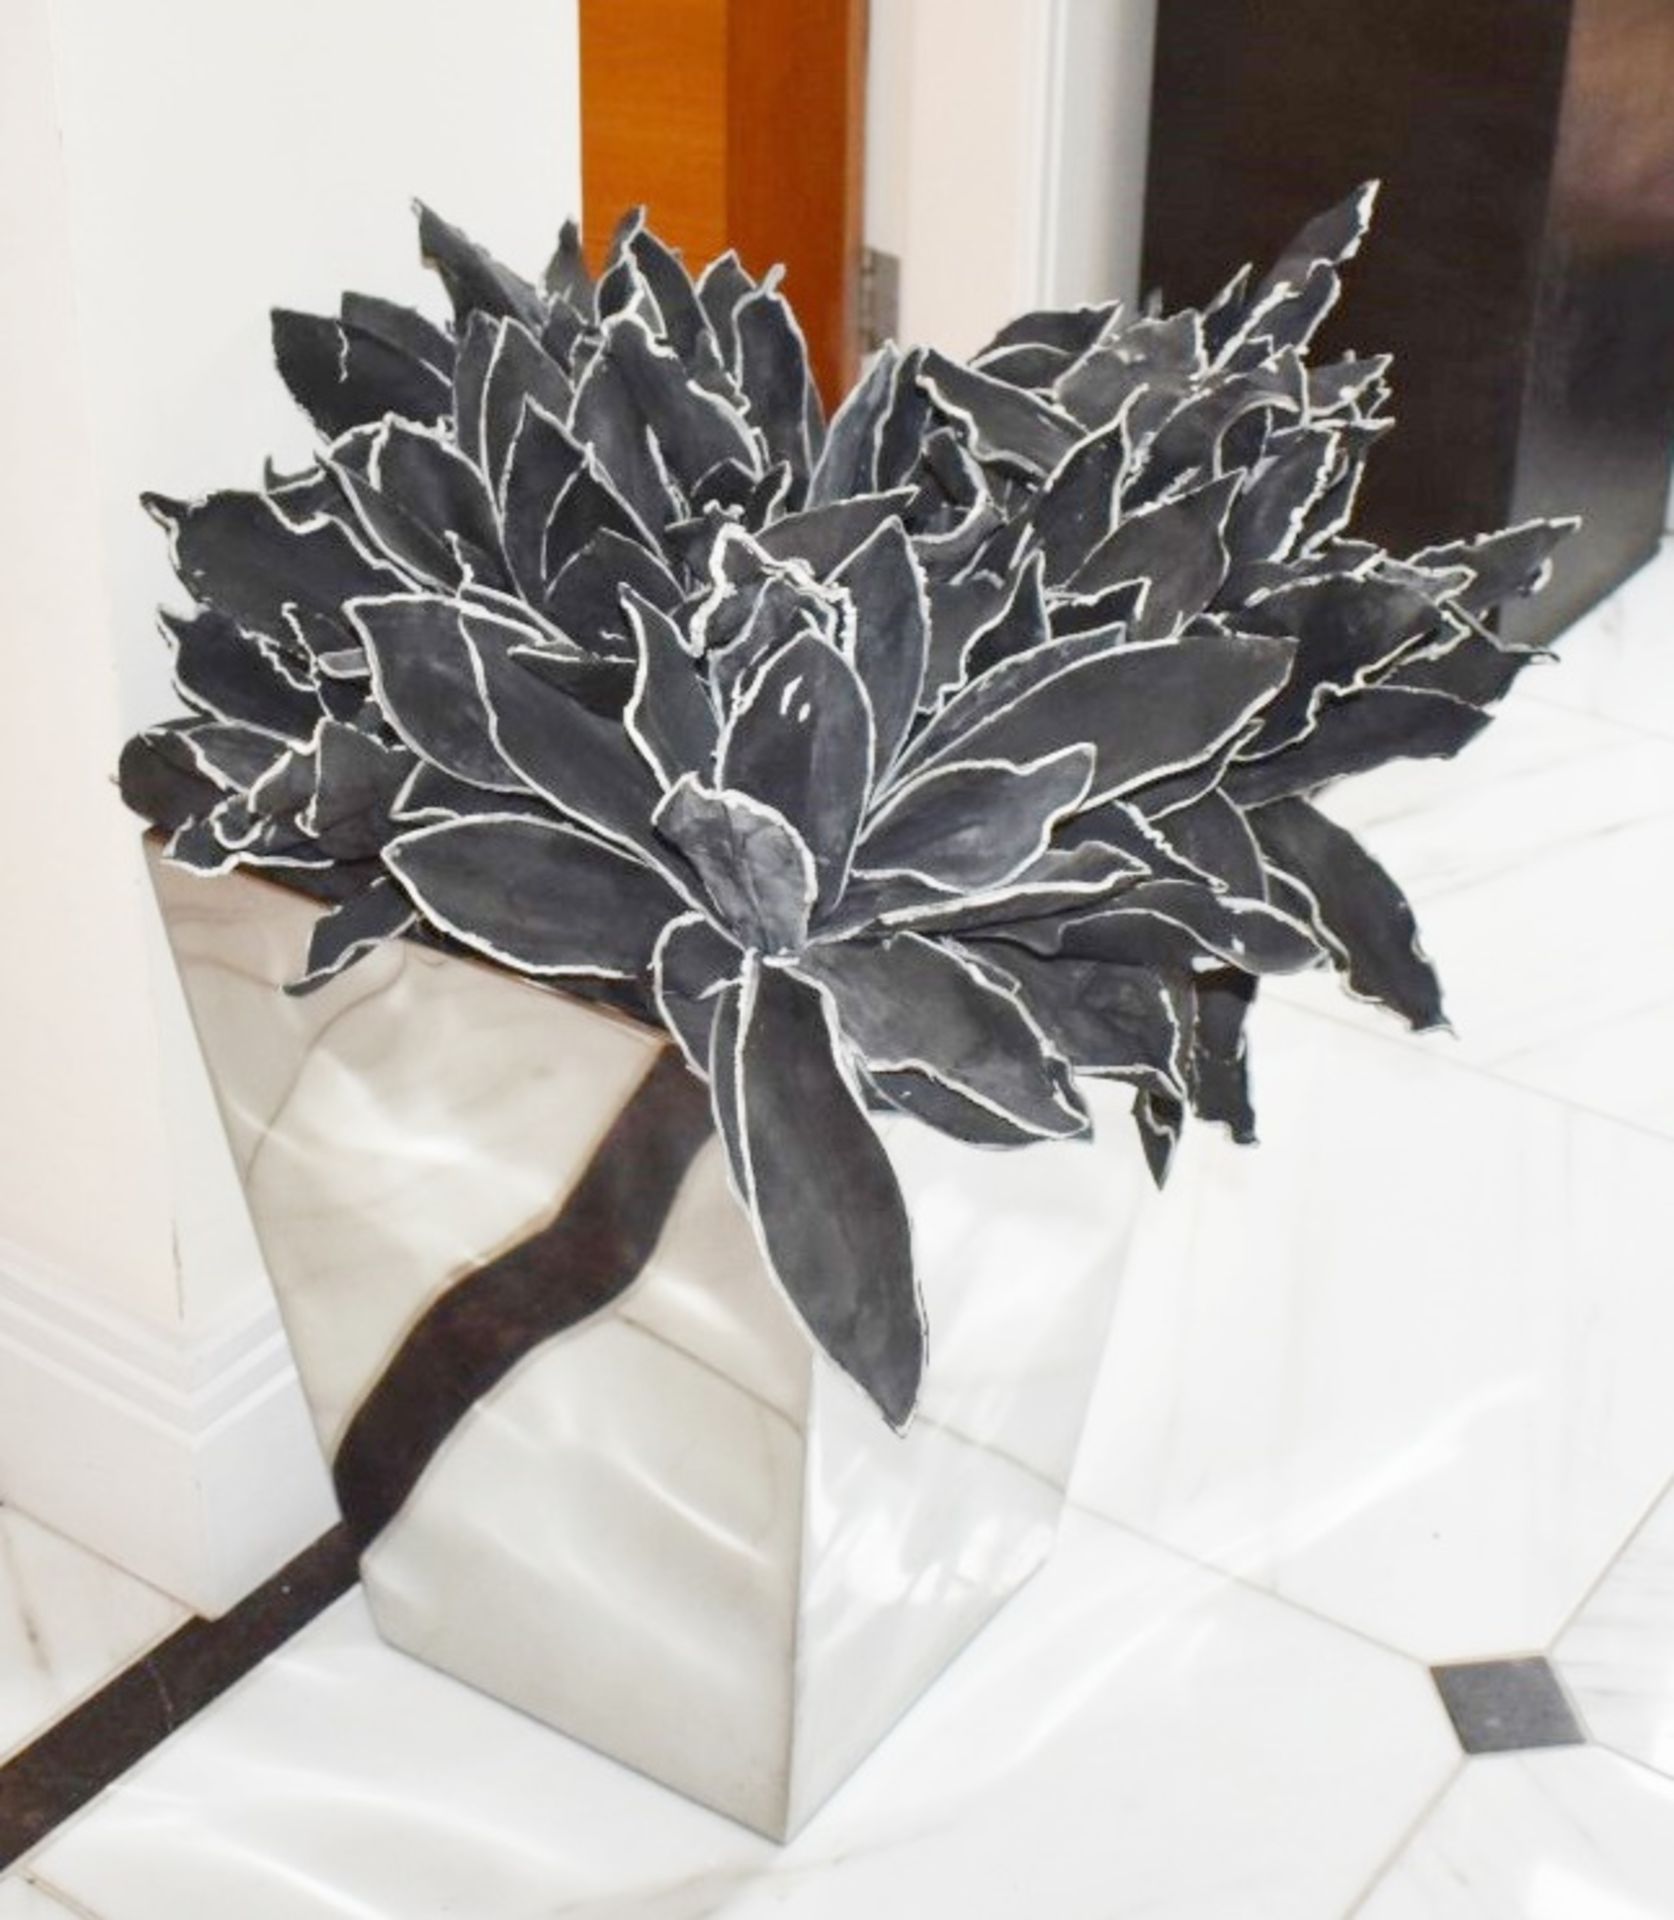 Pair of Decoration Chome Planters With Artificial Black Leaf Plants - Ideal For The Contemporary